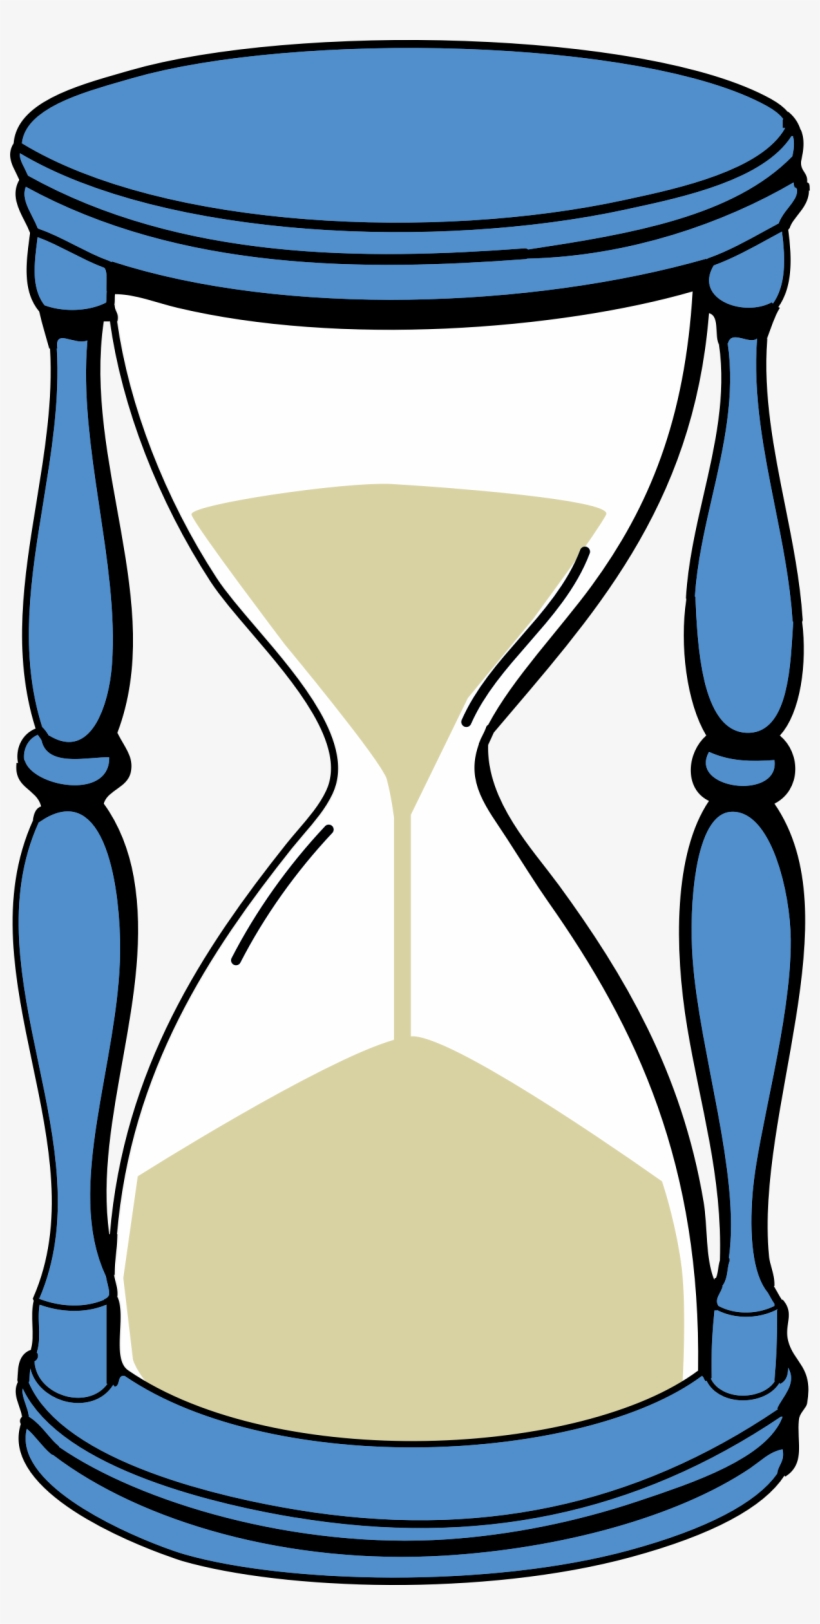 The Sand Of The Hourglass - Sand Timer Clipart, transparent png #115187